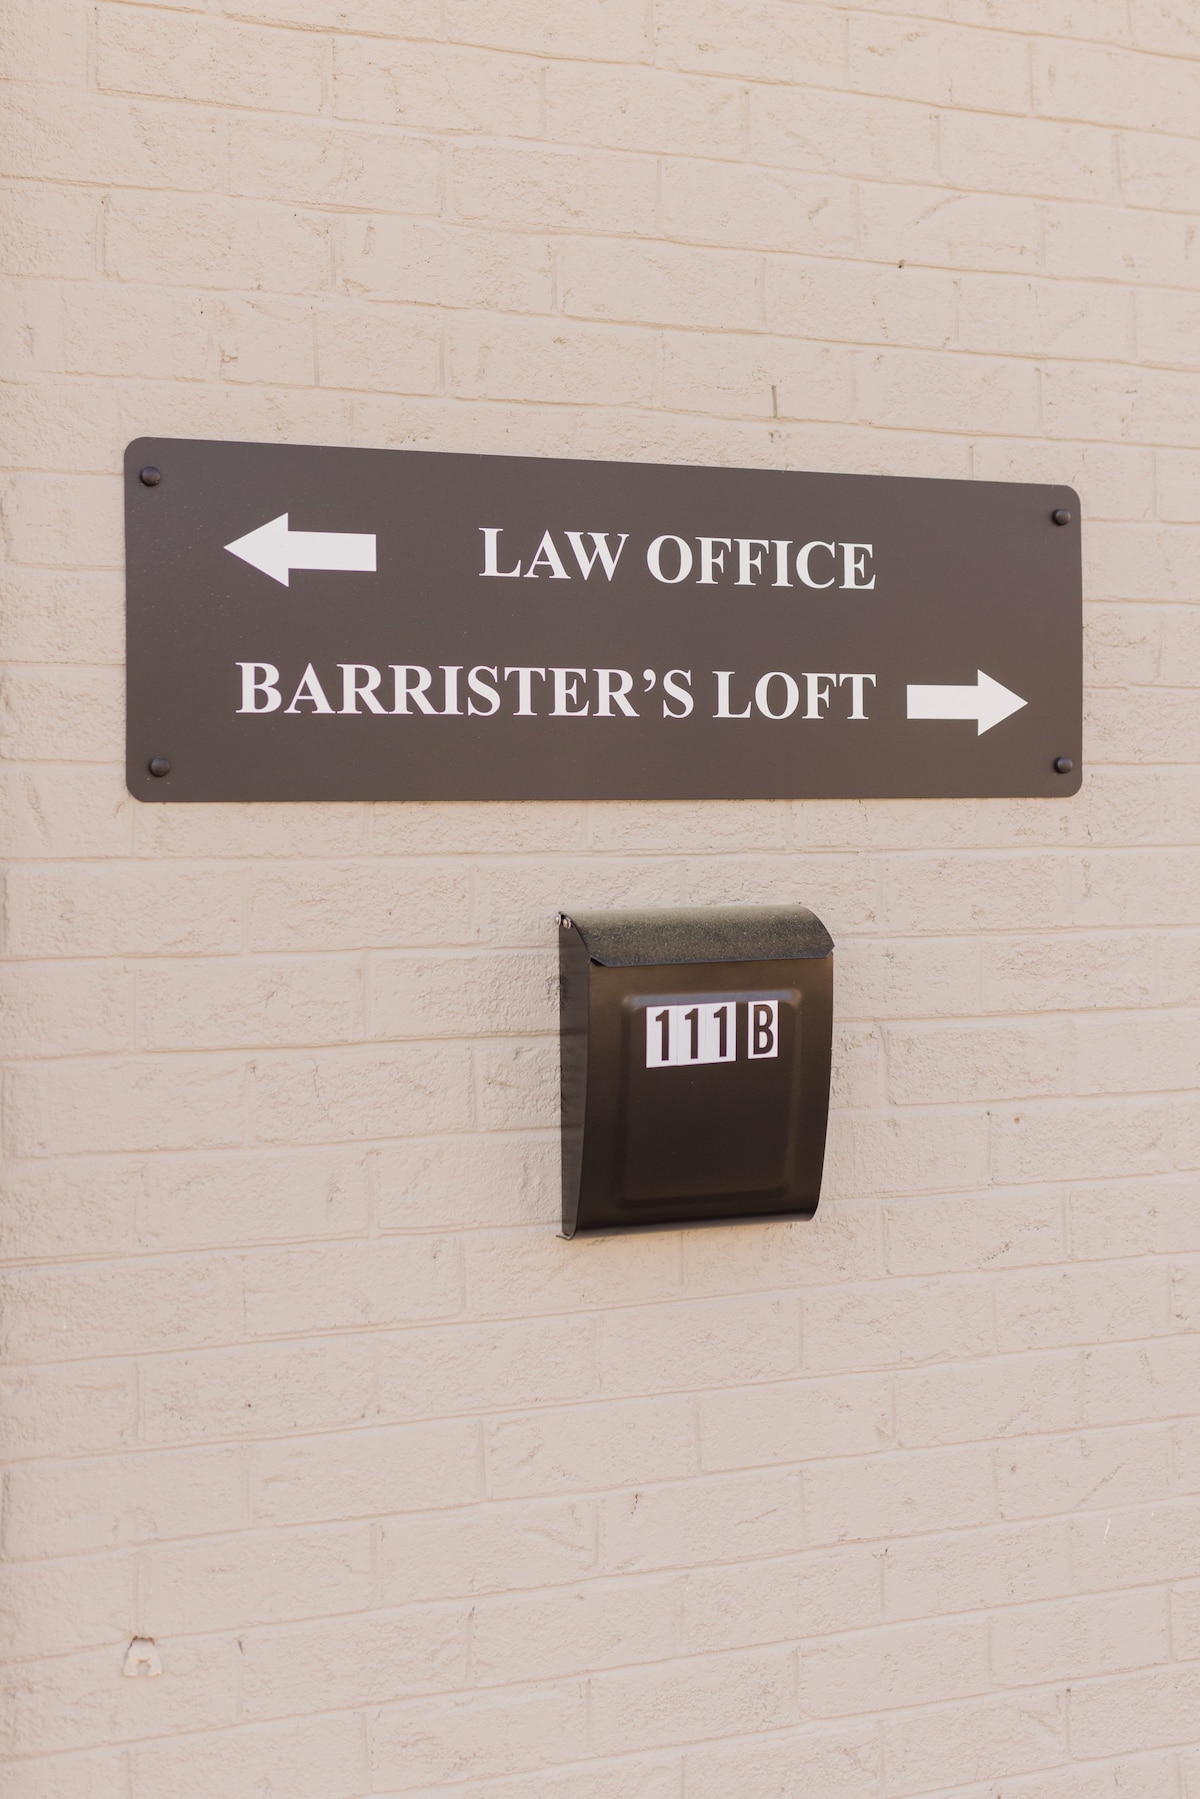 The Barrister 's Loft